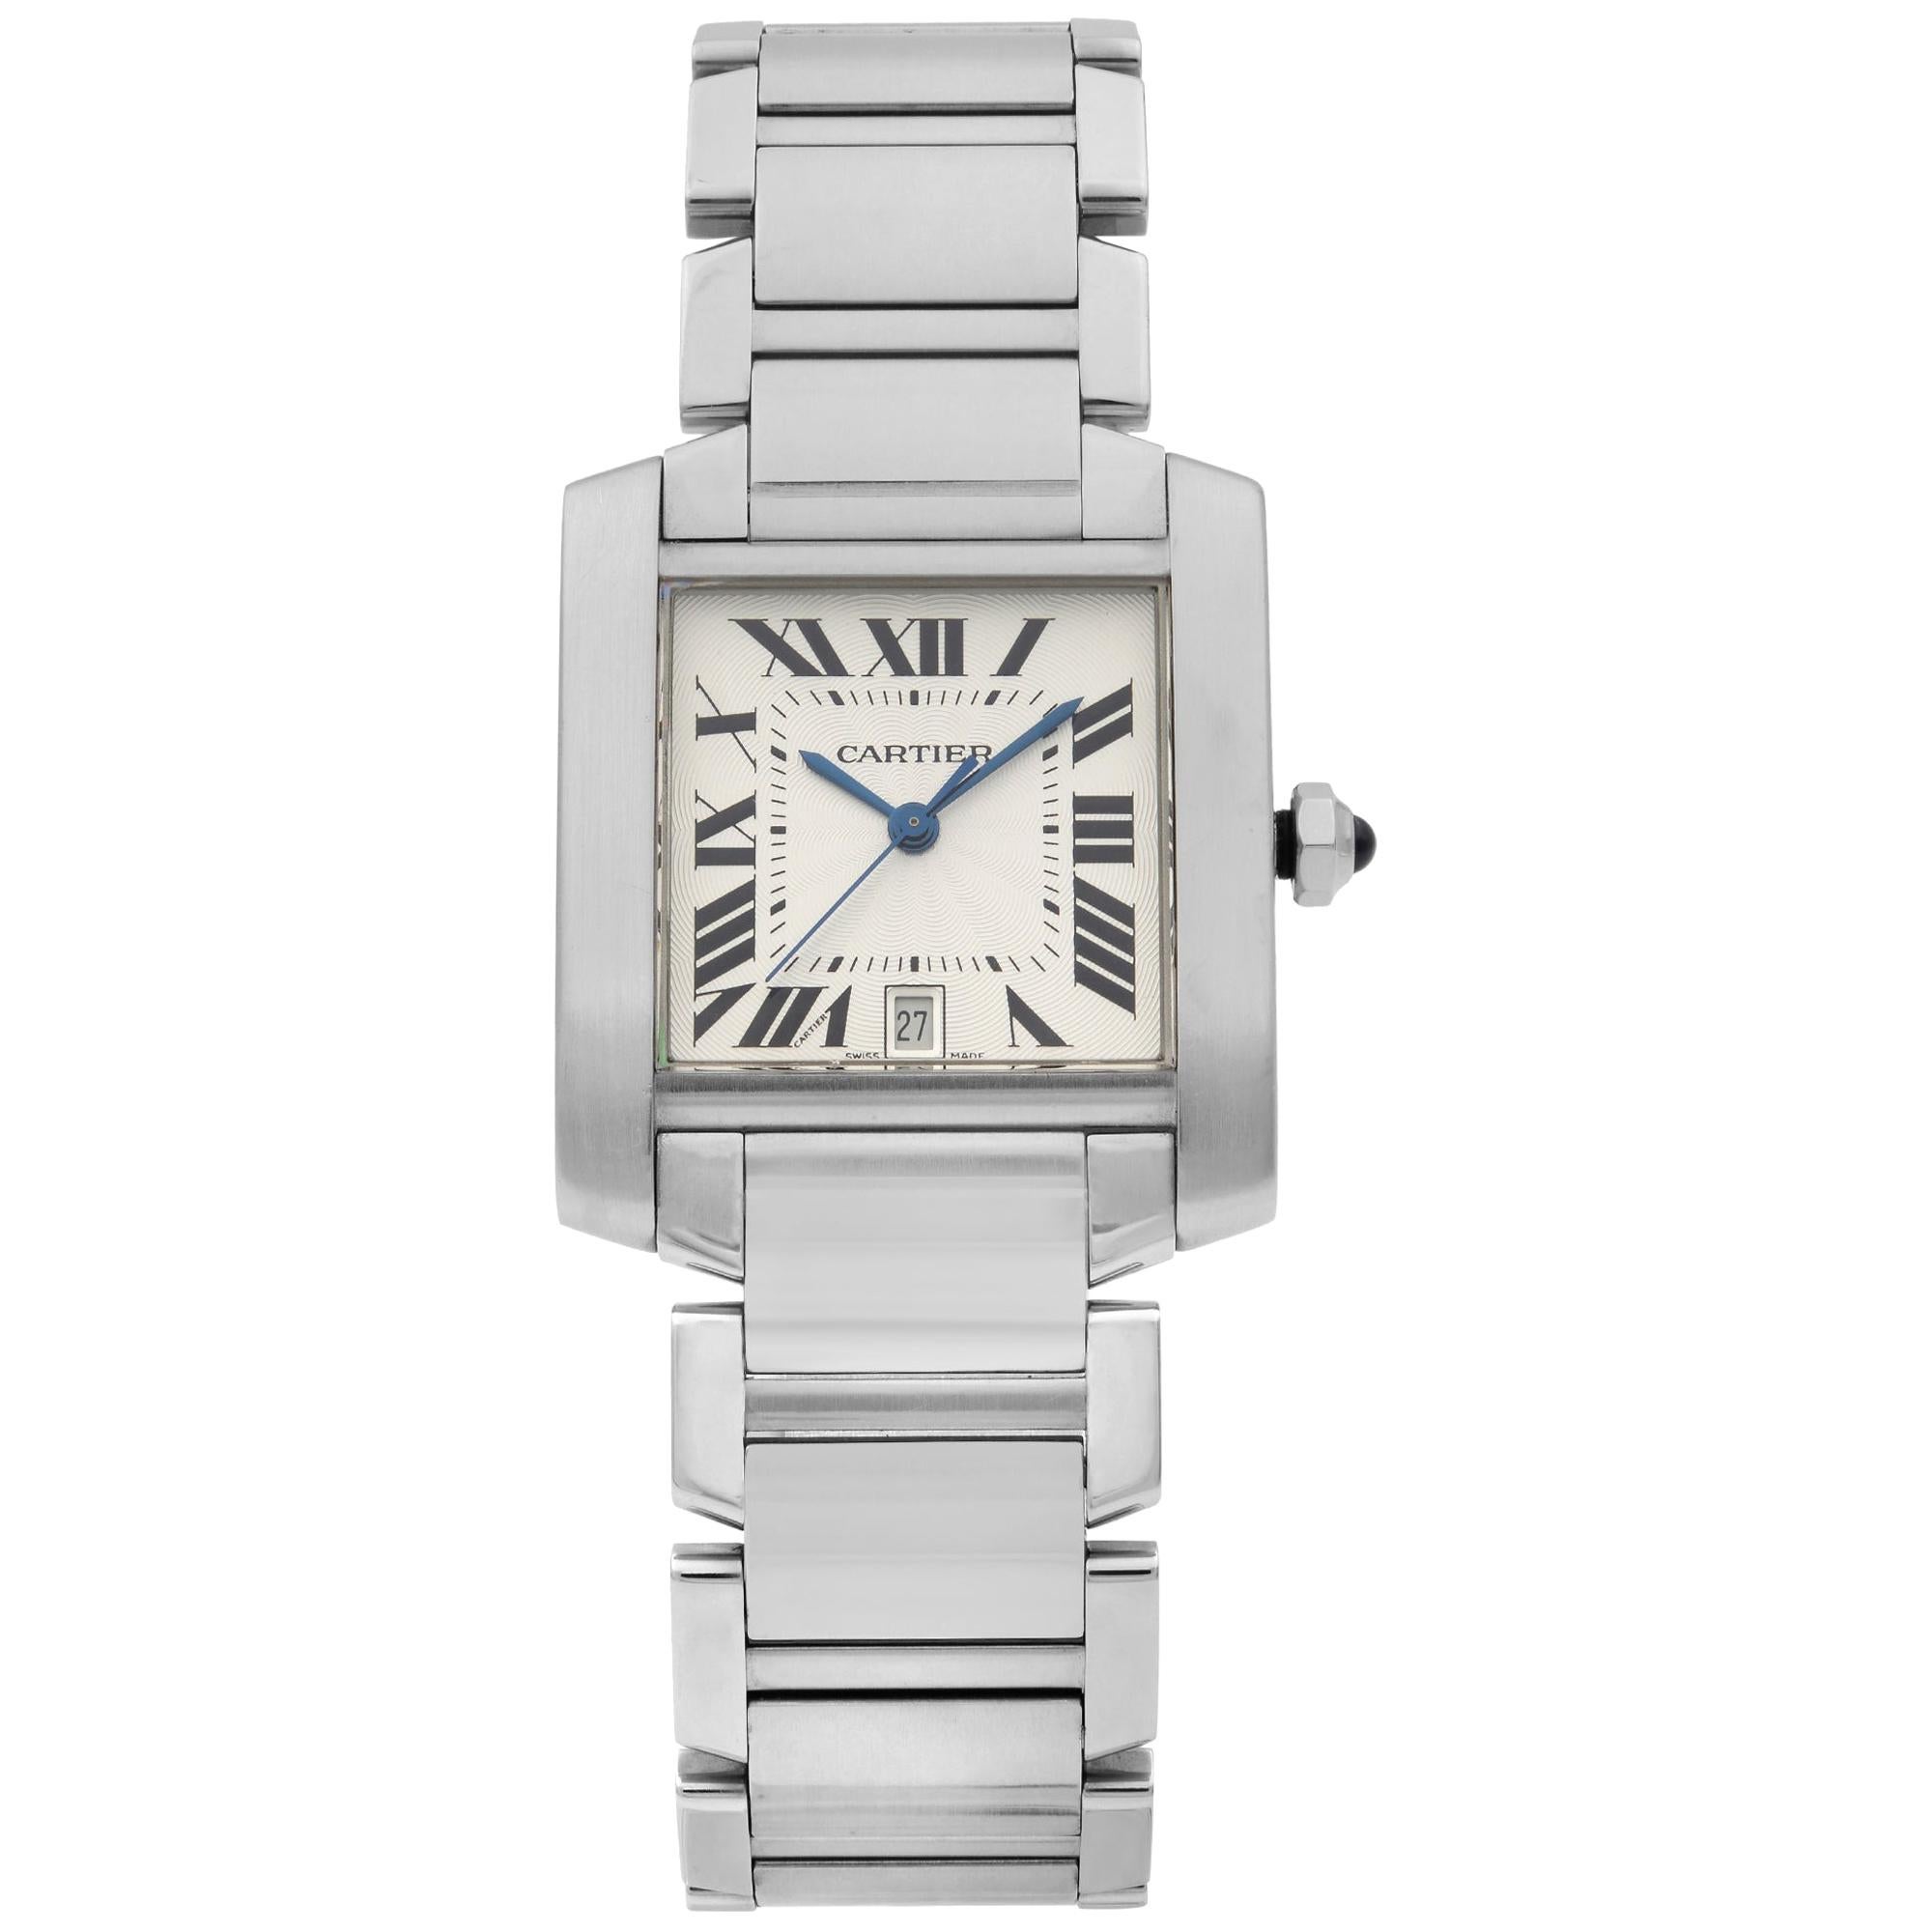 Cartier Tank Francaise 2302 Stainless Steel Silver Dial Men's Watch W51002Q3